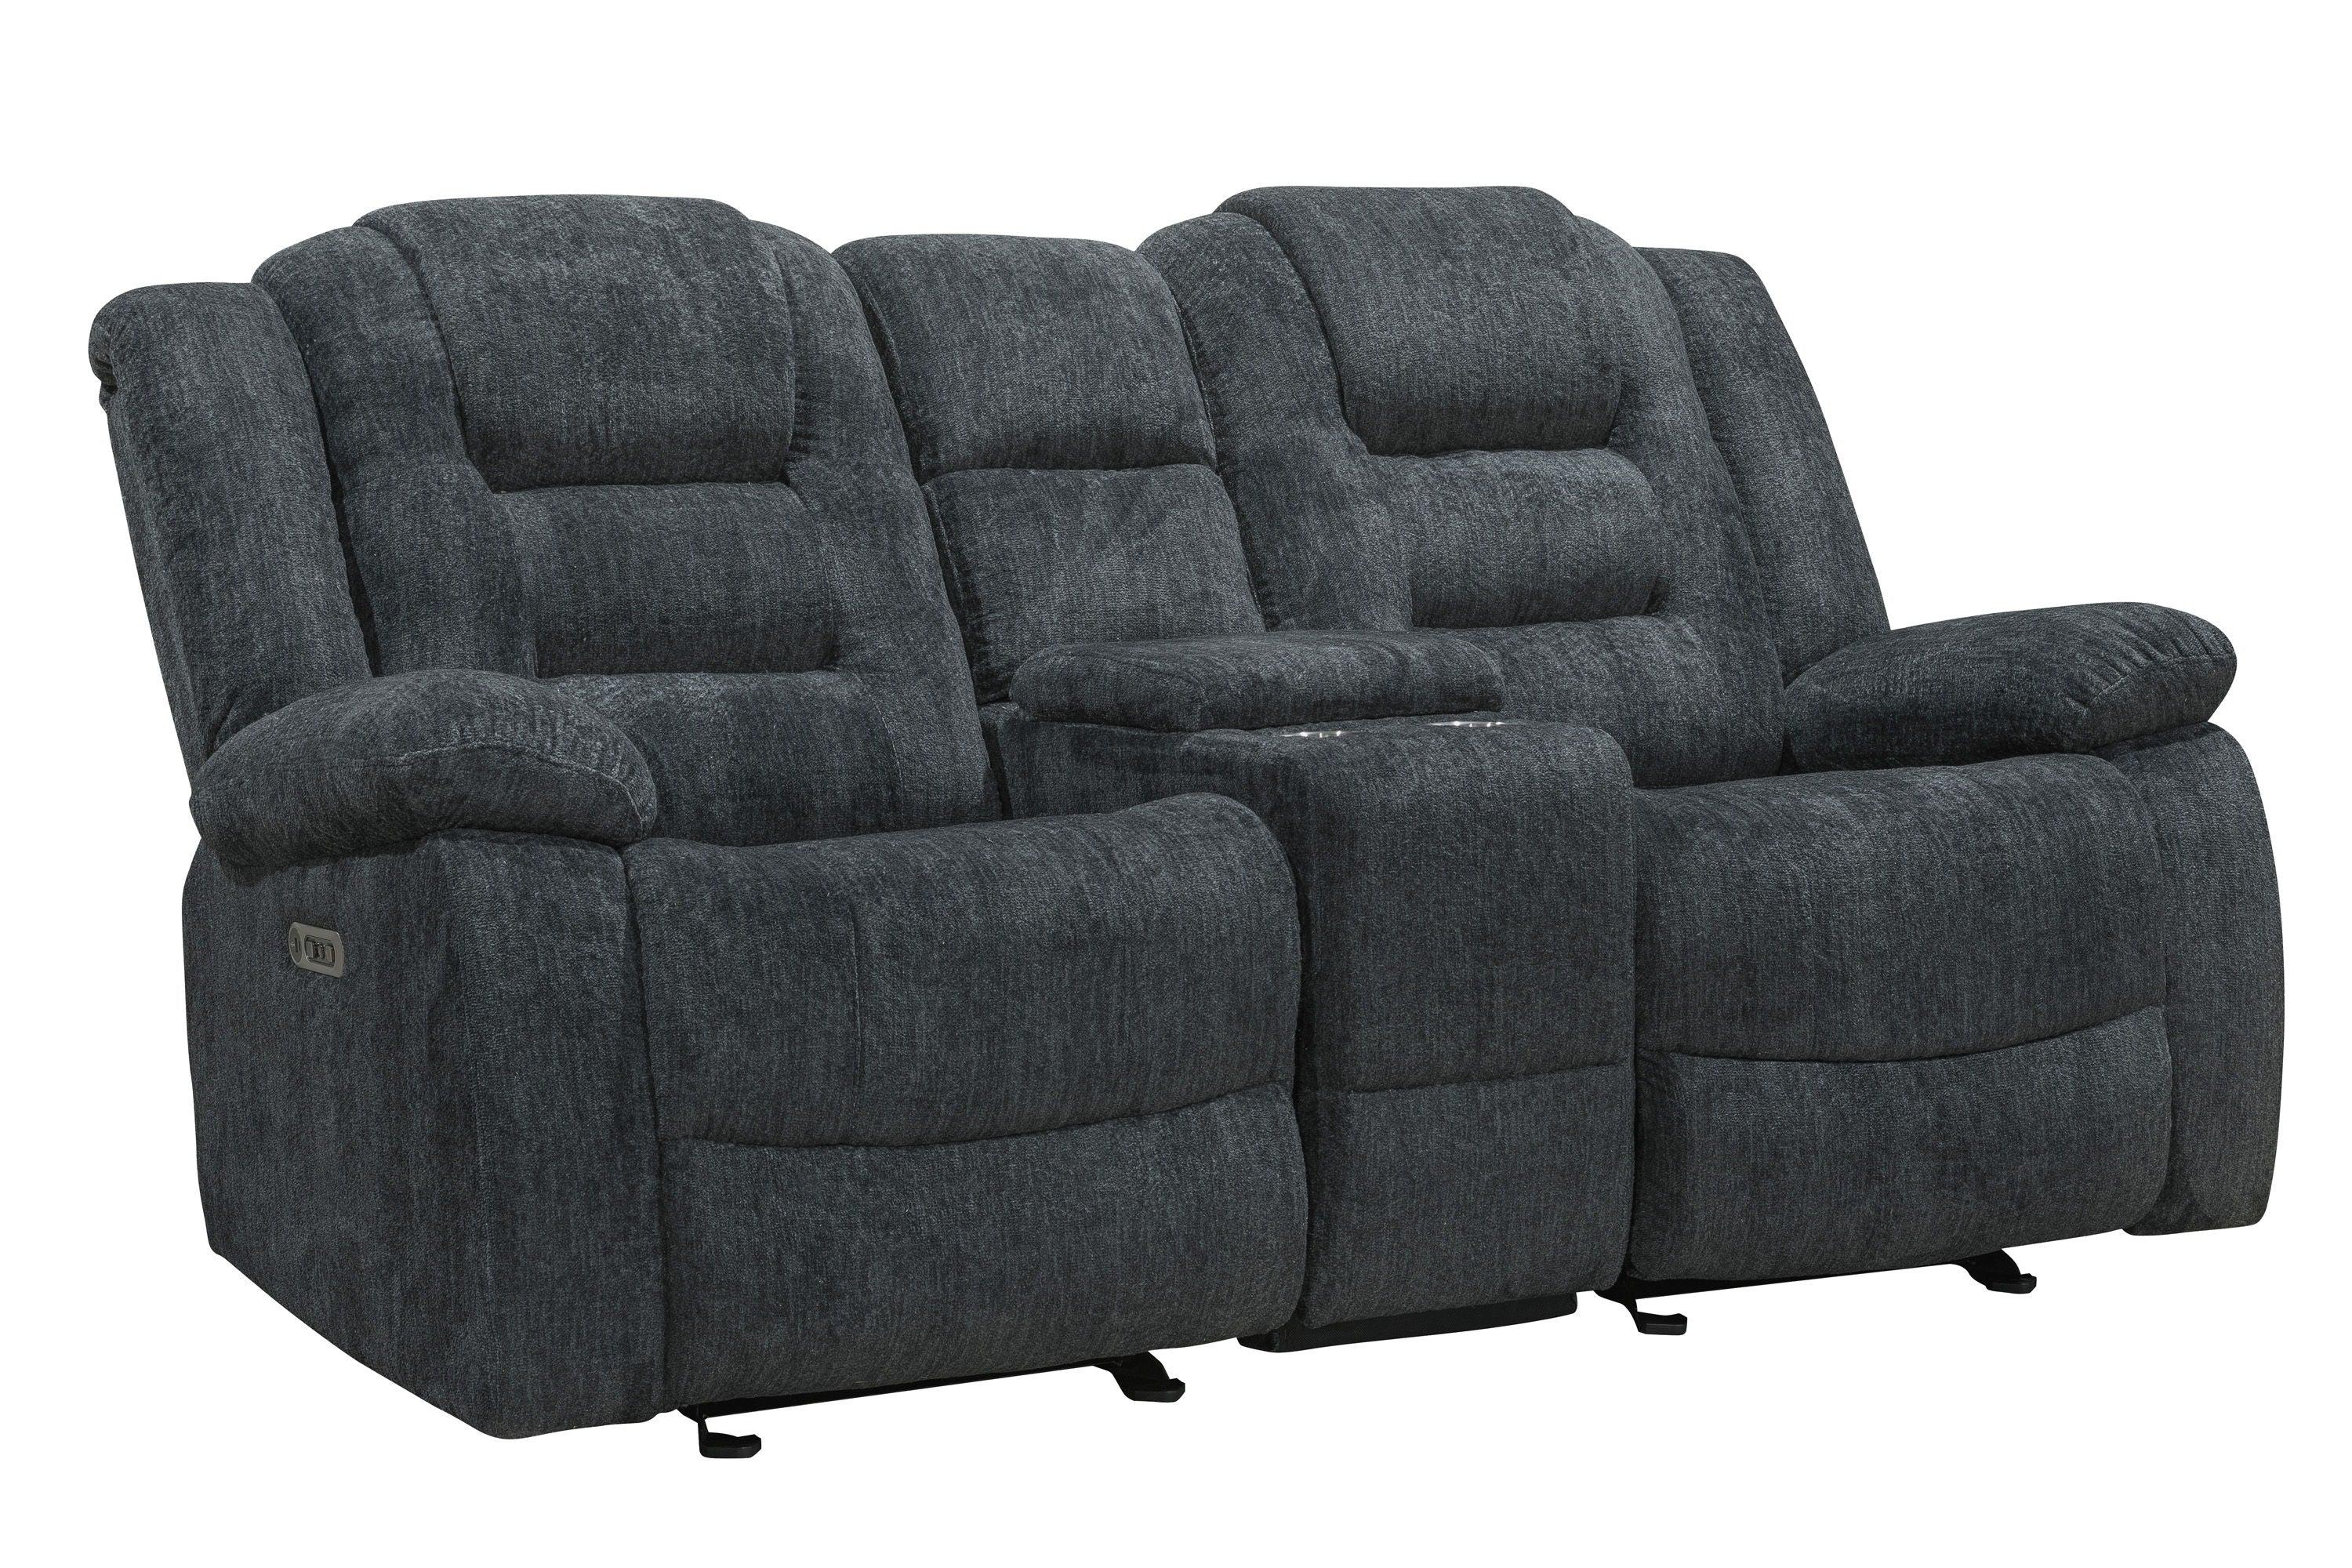 Parker Living - Bolton - Glider Reclining Console Loveseat - Misty Storm - 5th Avenue Furniture